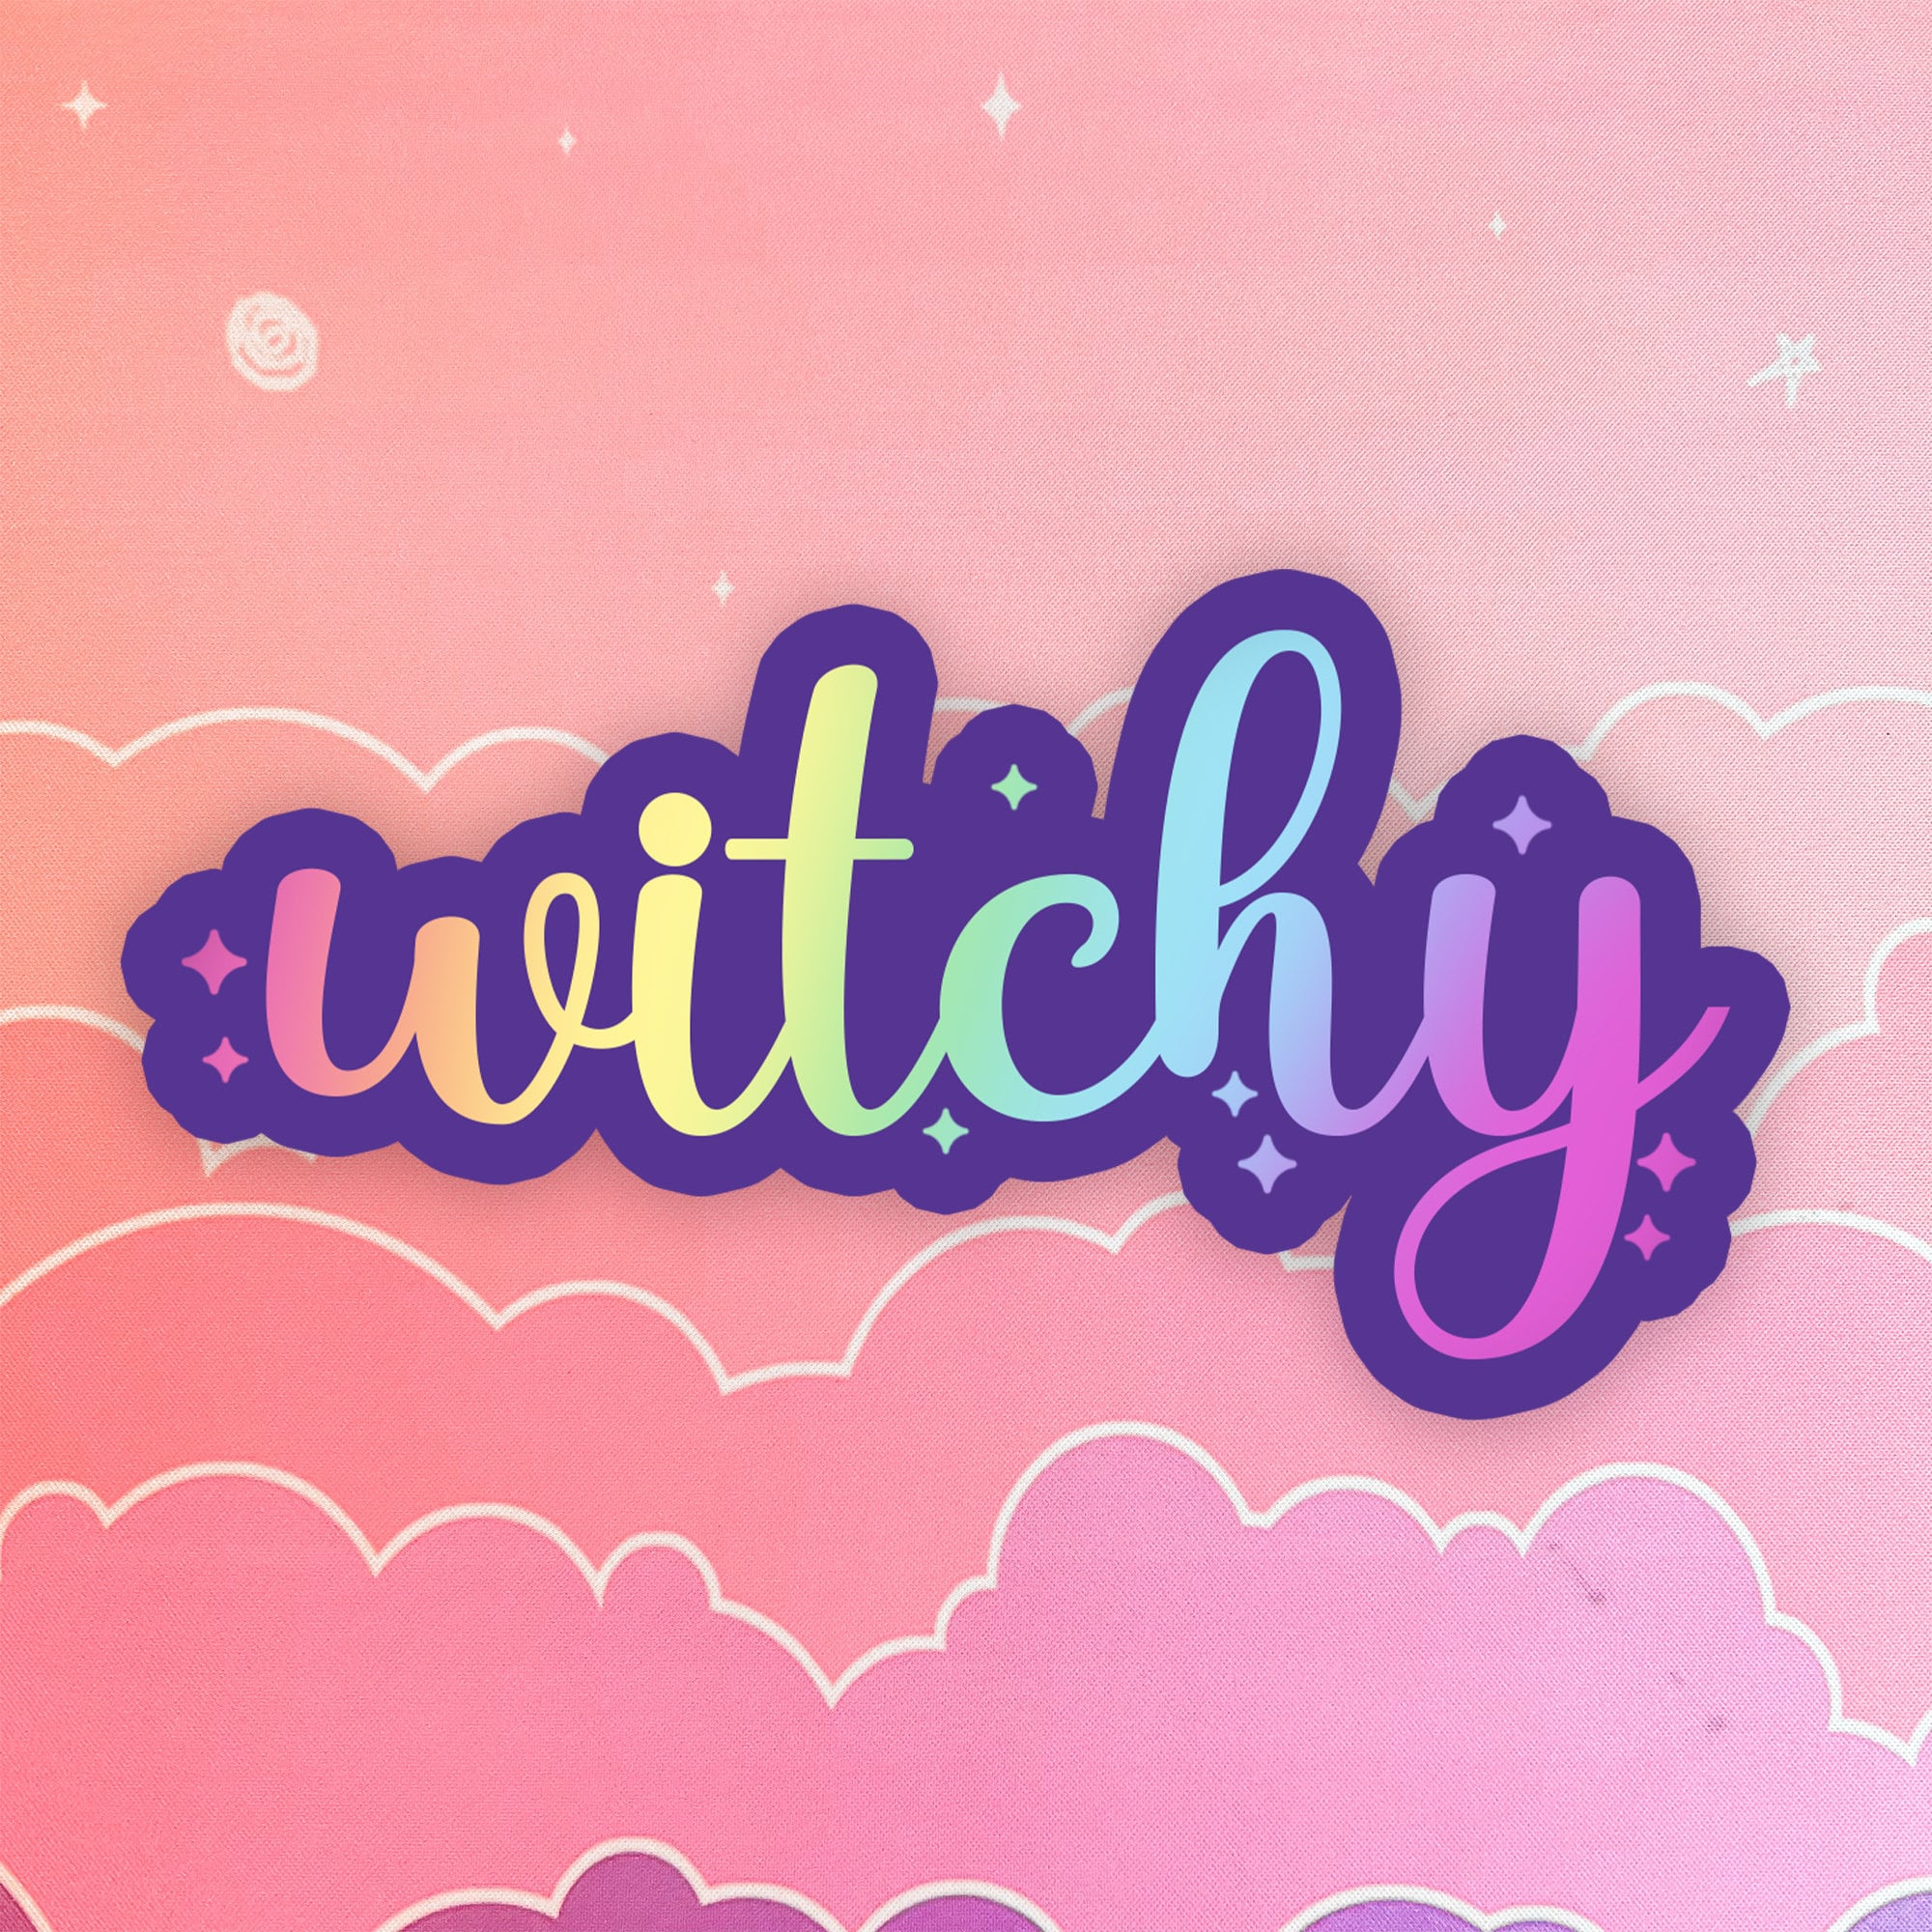 Witchy Sticker Halloween Aesthetic Laptop Sticker Purple and Rainbow Spooky Girly Stickers Cute Goth Kindle Stickers Hydroflask, Kawaii